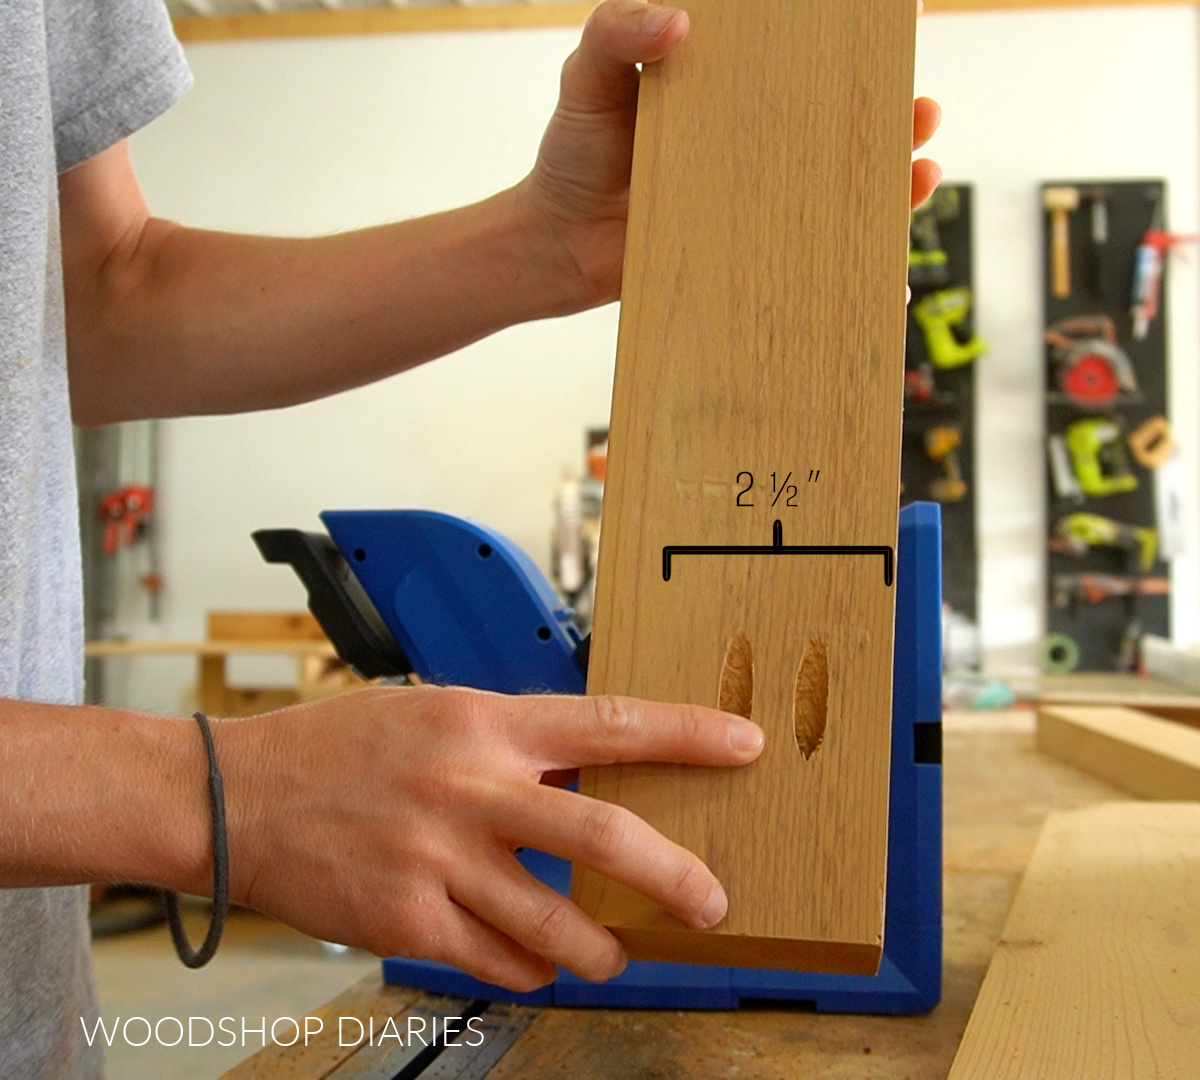 Shara Woodshop Diaries holding 2x4 with pocket holes drilled into the end with bracket showing 2 ½" spacing where pocket holes are placed